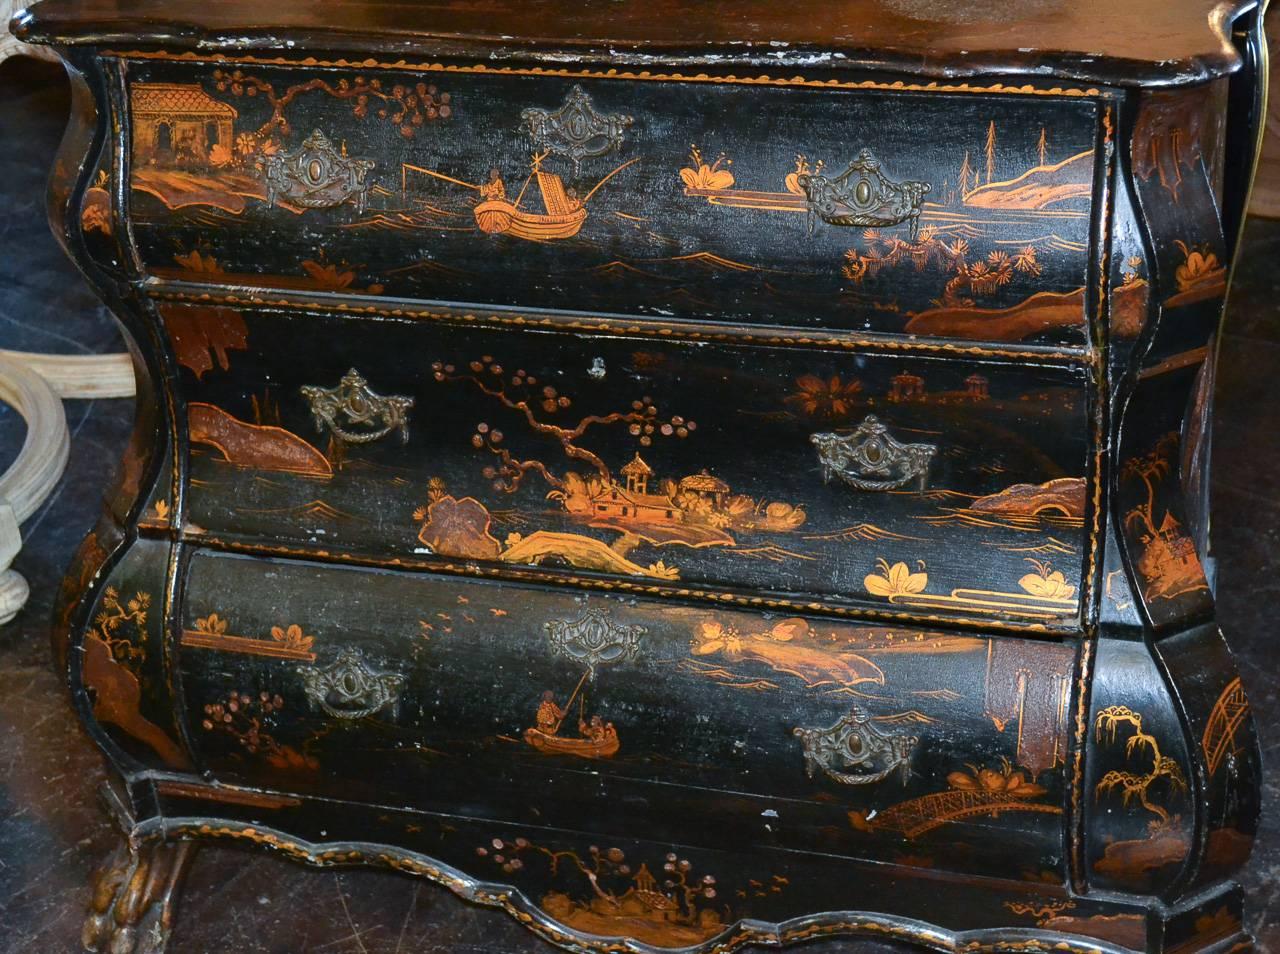 Splendid 18th century Dutch chinoiserie three-drawer shaped commode. Having lovely chinoiserie decorations on all sides in landscape motif, ornate bronze mounts and resting on claw feet. Exhibiting a time worn patina that offers rich character and